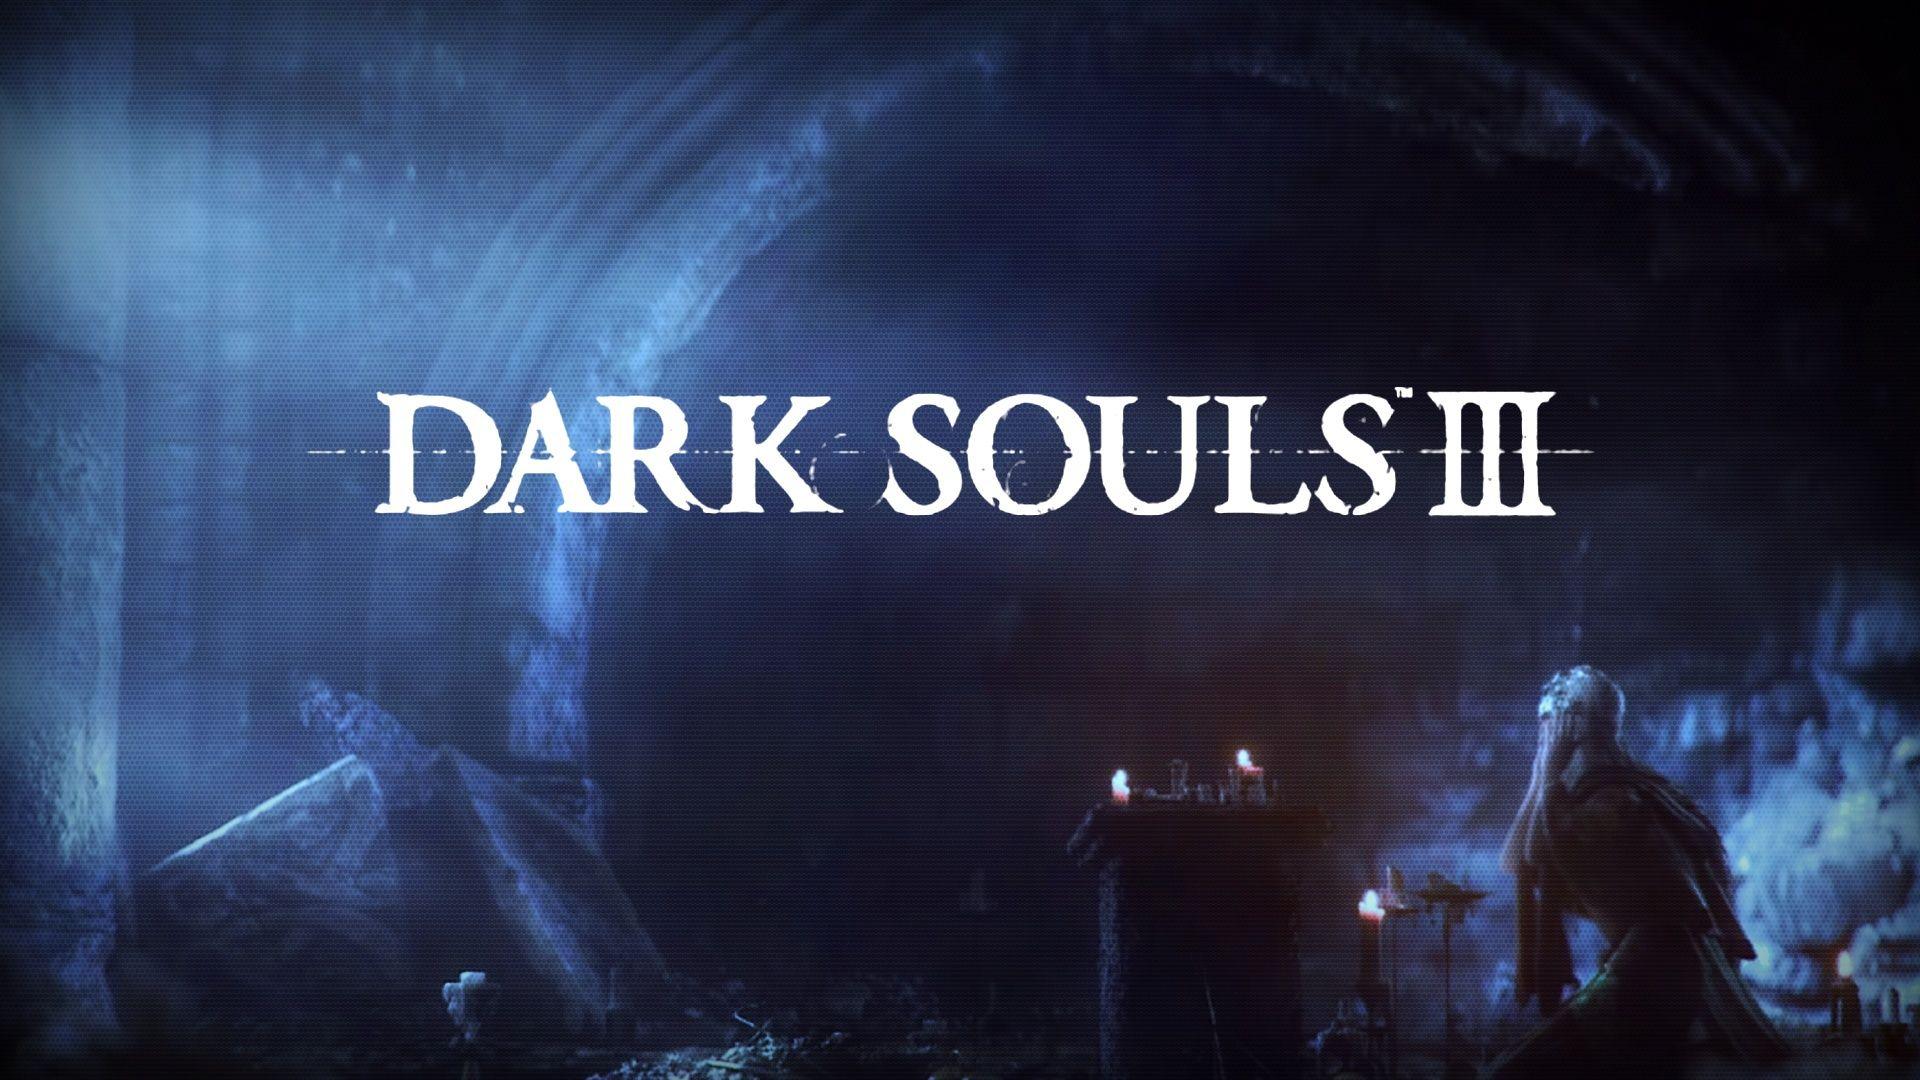 Dark Souls 3 Wallpaper Image Photo Picture Background